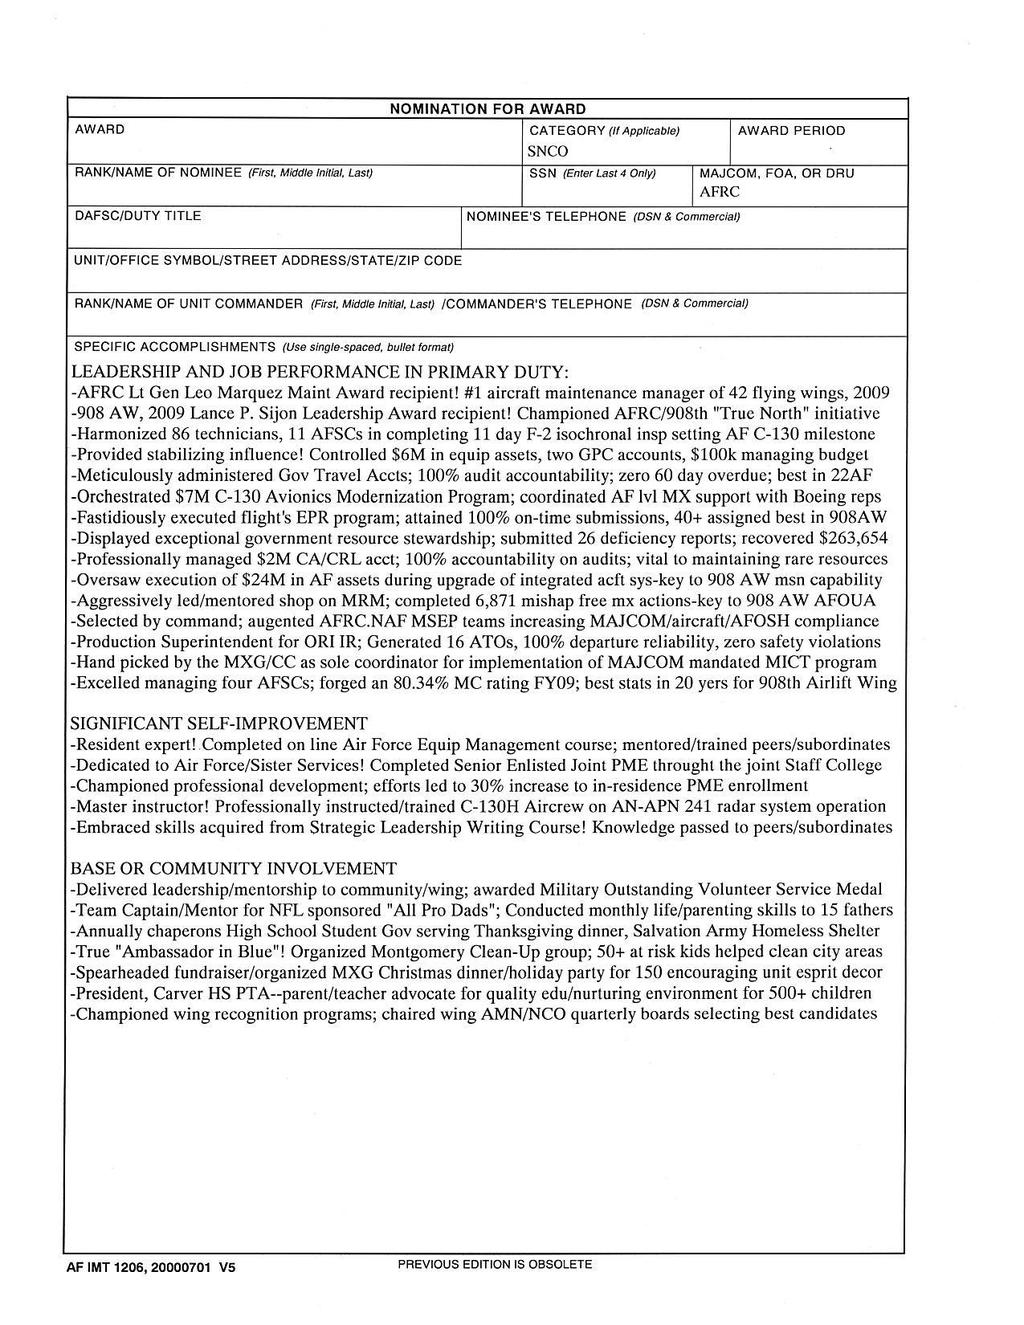 24 482FWI36-2805 31 OCTOBER 2012 Attachment 11 EXAMPLE AF FORM 1206,